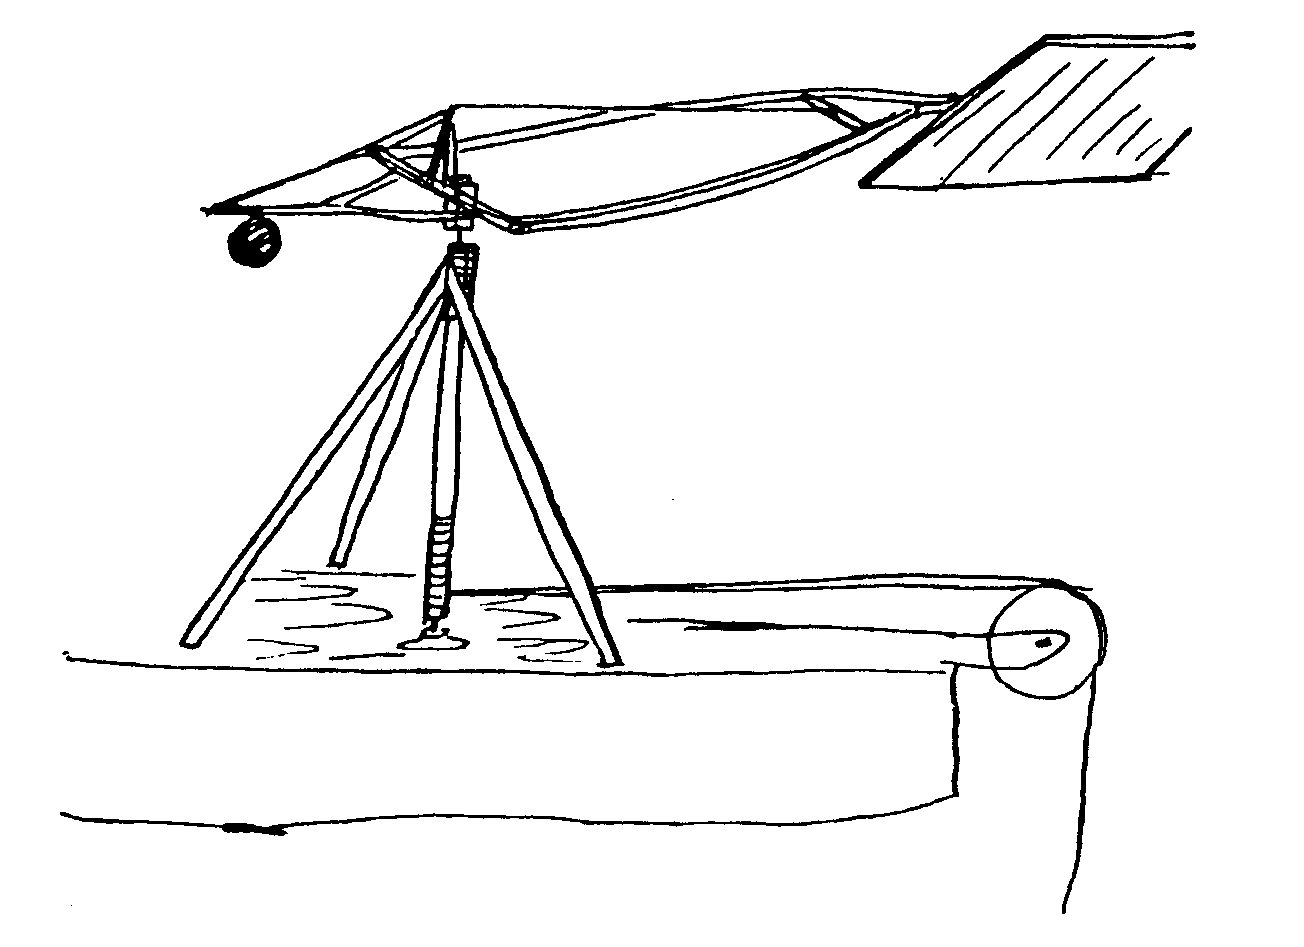 In the early 1800s, George Cayley devised the whirling arm as a way to measure the drag and lift of airfoils.
